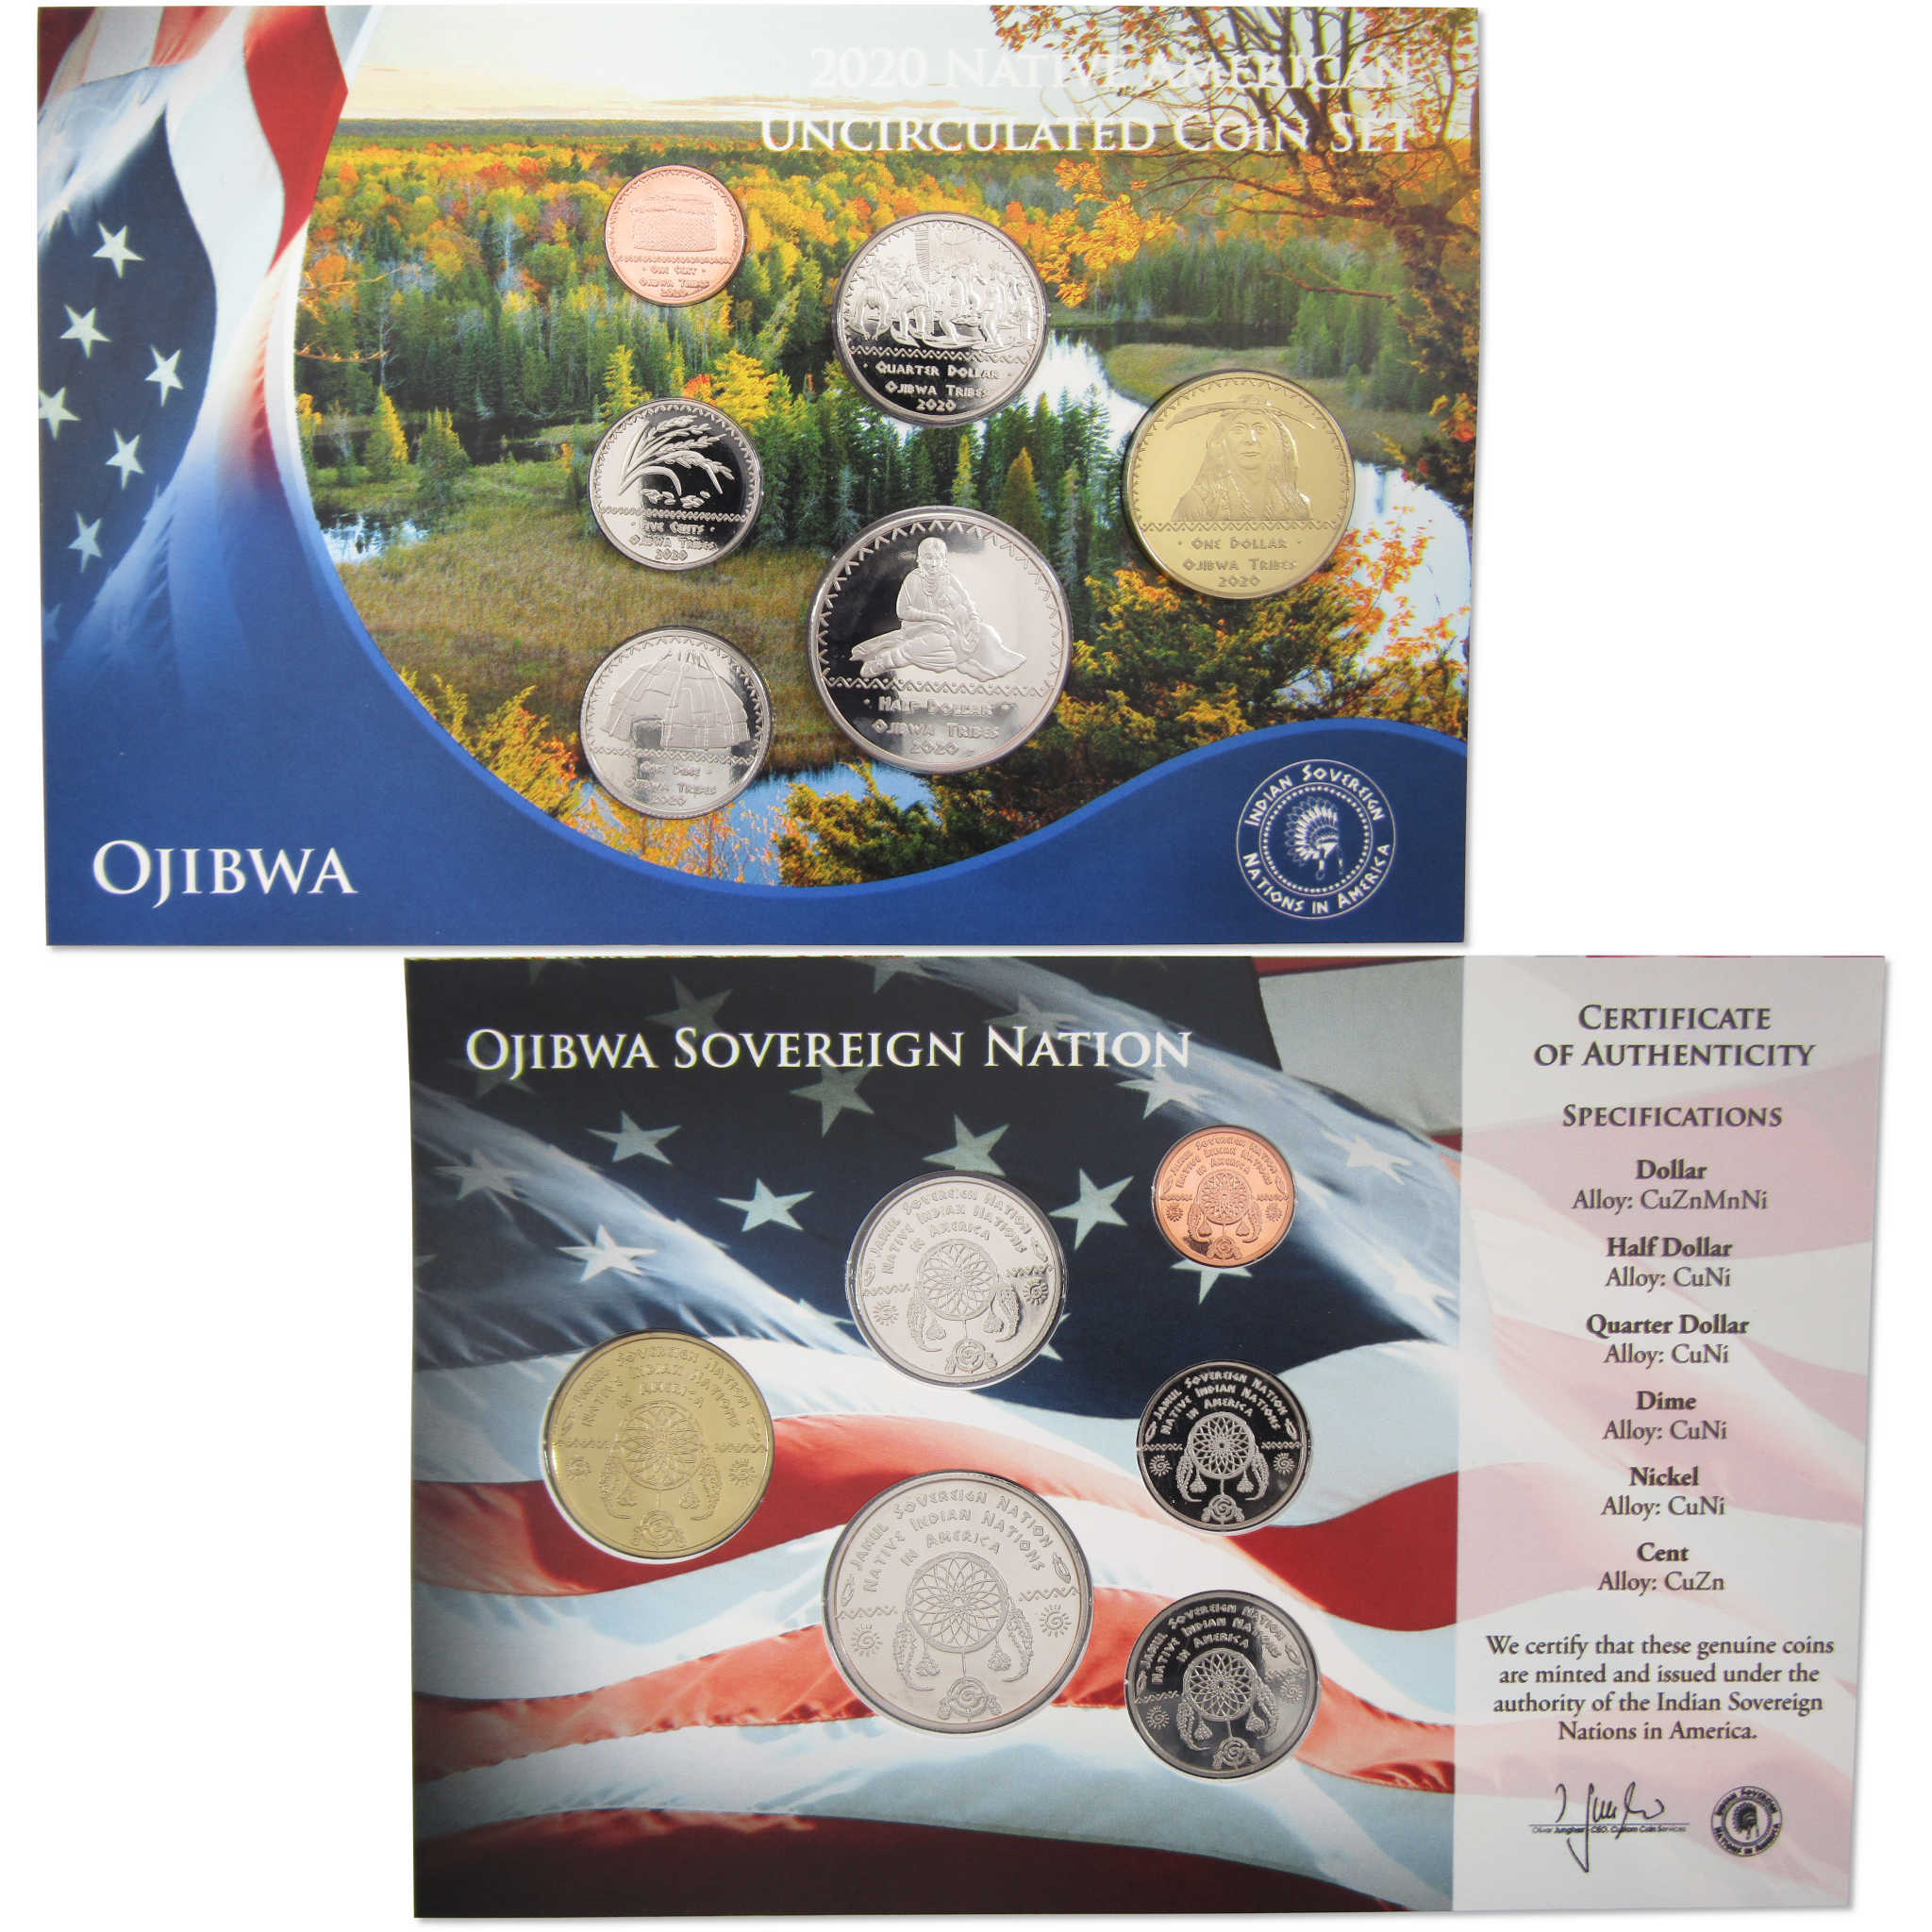 2020 Jamul Native American Ojibwa Sovereign Nation Uncirculated Coin Set